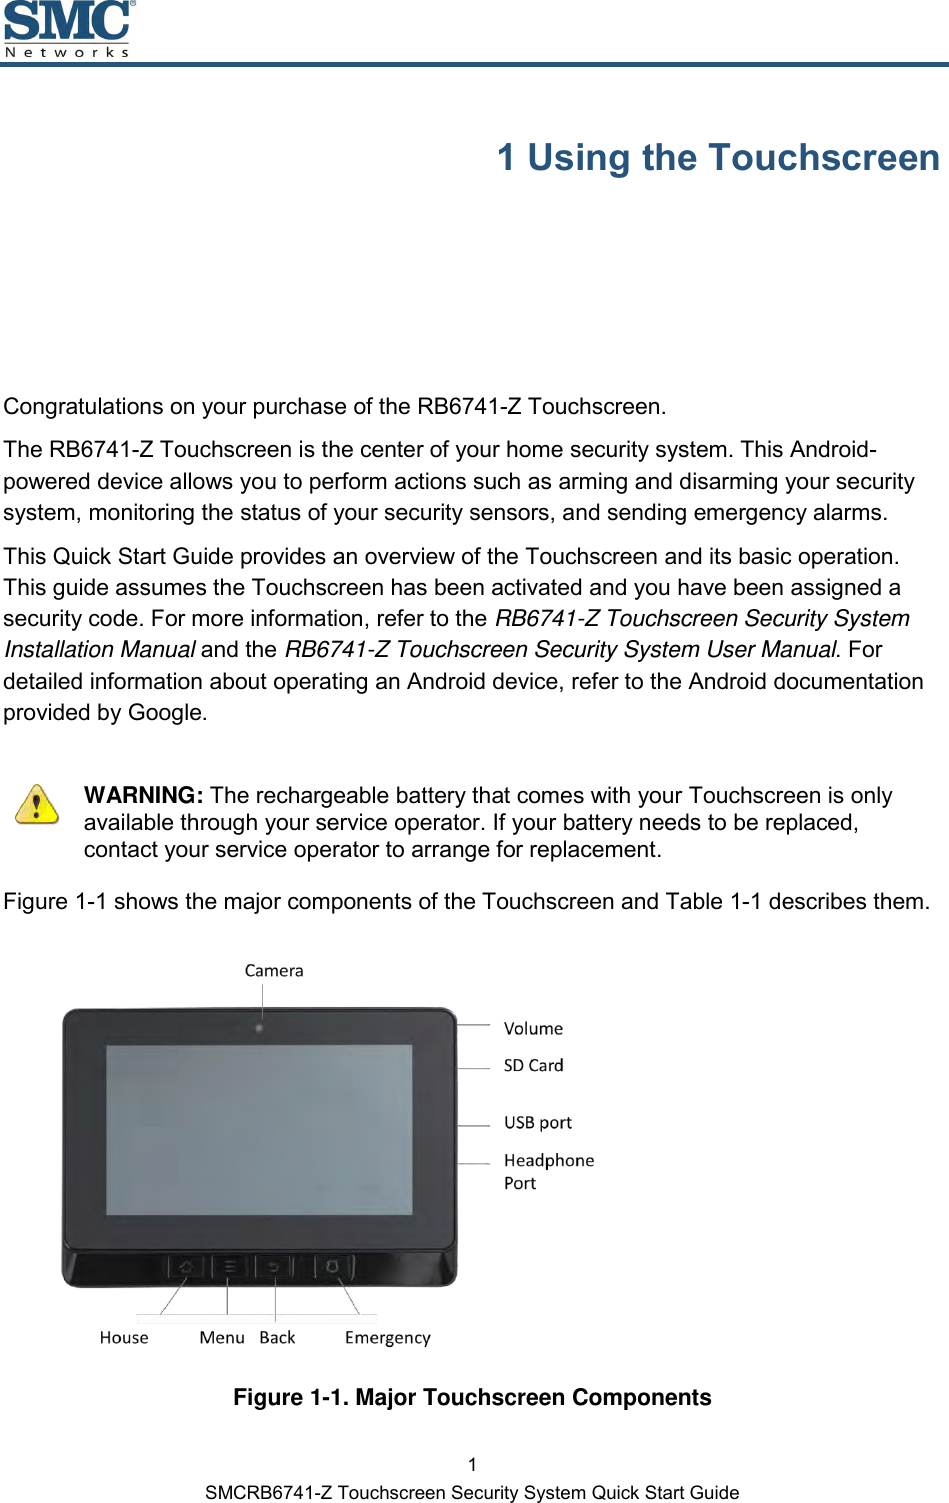  1 SMCRB6741-Z Touchscreen Security System Quick Start Guide 1 Using the Touchscreen Congratulations on your purchase of the RB6741-Z Touchscreen. The RB6741-Z Touchscreen is the center of your home security system. This Android-powered device allows you to perform actions such as arming and disarming your security system, monitoring the status of your security sensors, and sending emergency alarms. This Quick Start Guide provides an overview of the Touchscreen and its basic operation. This guide assumes the Touchscreen has been activated and you have been assigned a security code. For more information, refer to the RB6741-Z Touchscreen Security System Installation Manual and the RB6741-Z Touchscreen Security System User Manual. For detailed information about operating an Android device, refer to the Android documentation provided by Google.    WARNING: The rechargeable battery that comes with your Touchscreen is only available through your service operator. If your battery needs to be replaced, contact your service operator to arrange for replacement. Figure 1-1 shows the major components of the Touchscreen and Table 1-1 describes them.  Figure 1-1. Major Touchscreen Components 